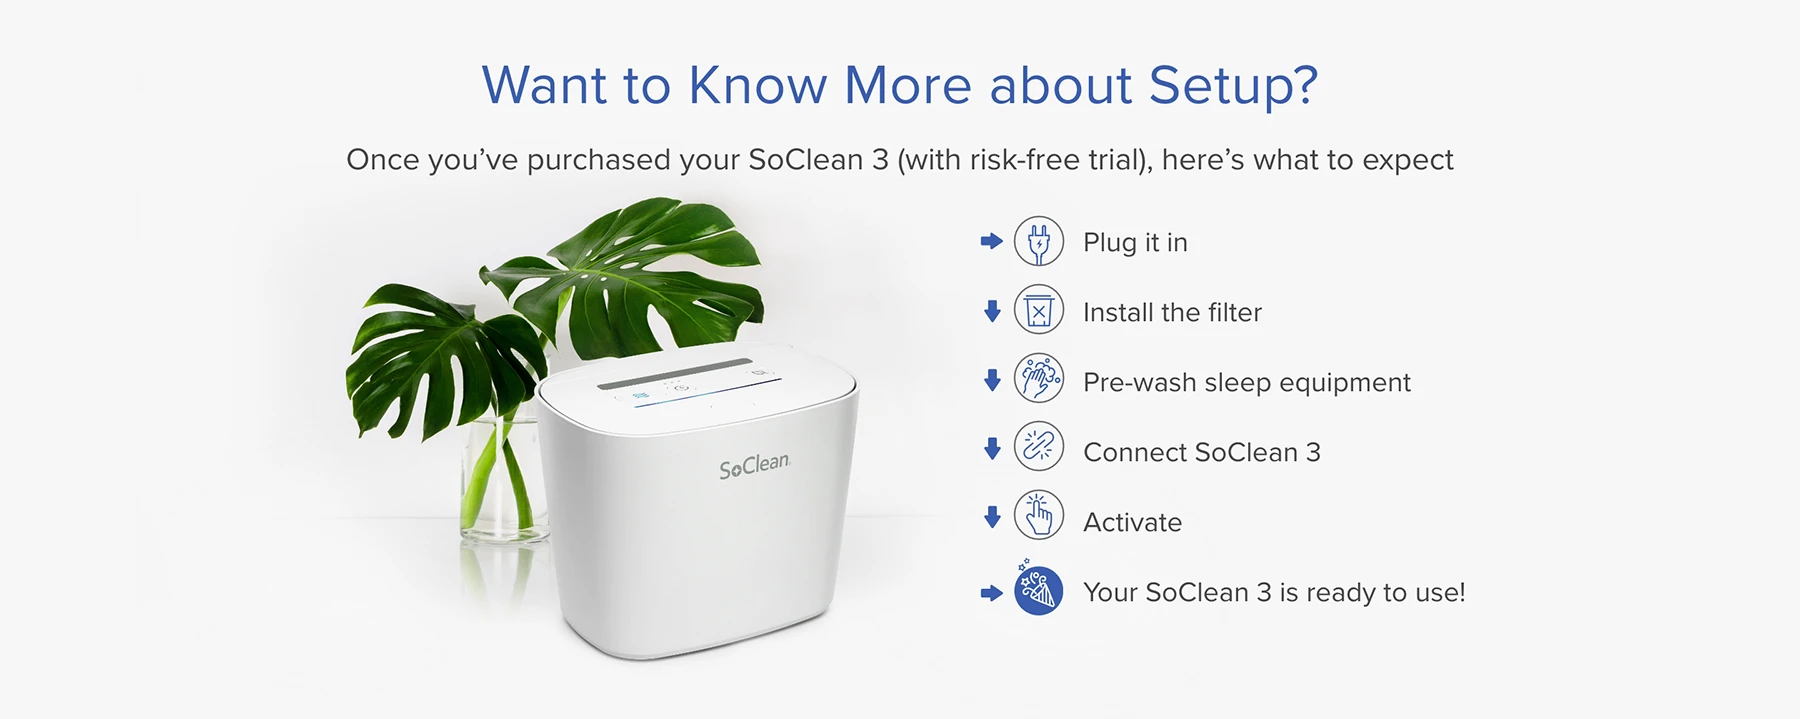 Setting up your SoClean 3